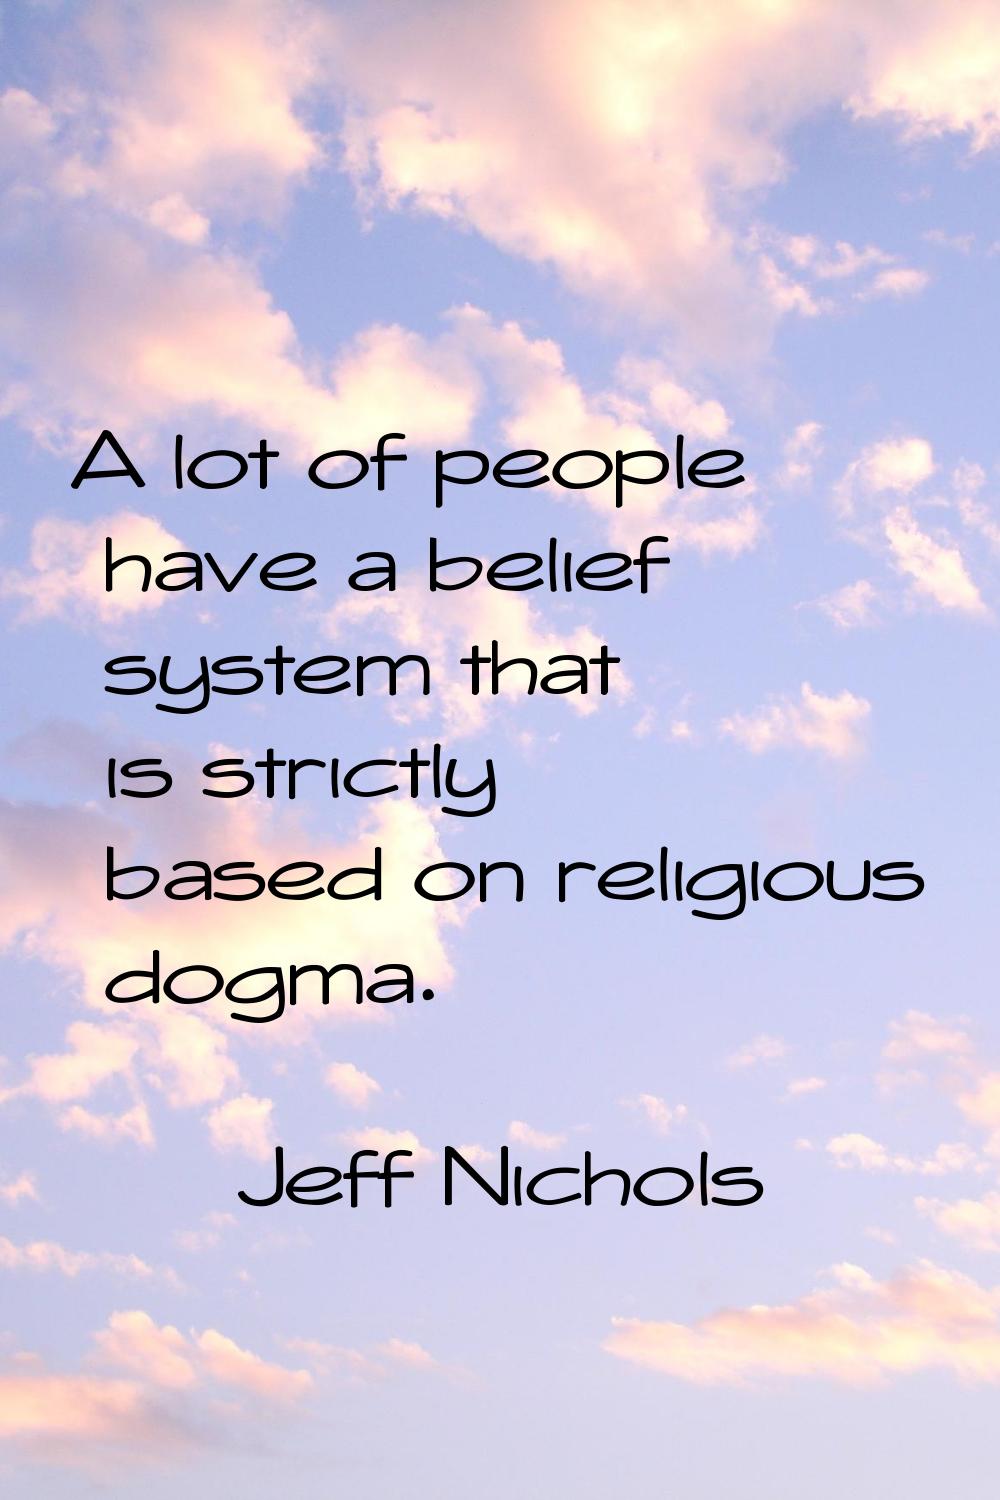 A lot of people have a belief system that is strictly based on religious dogma.